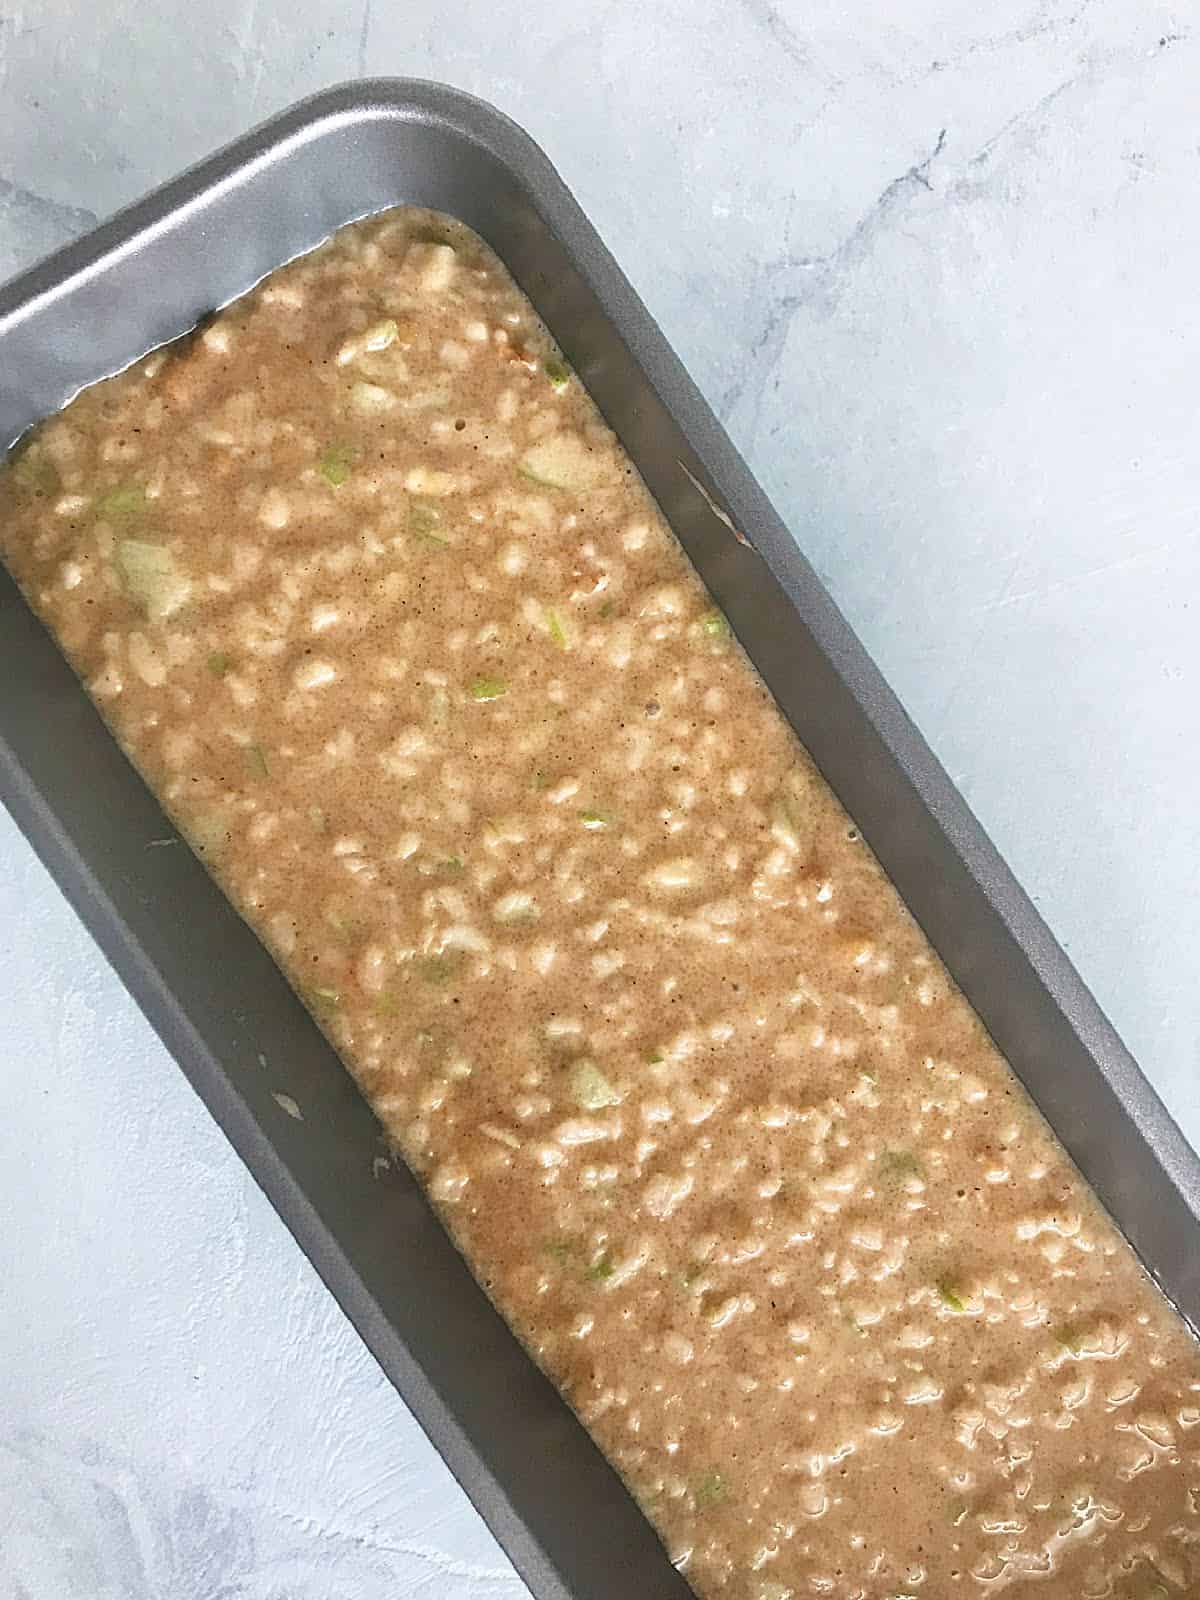 Apple cake batter in a metal loaf pan on a white marble surface.